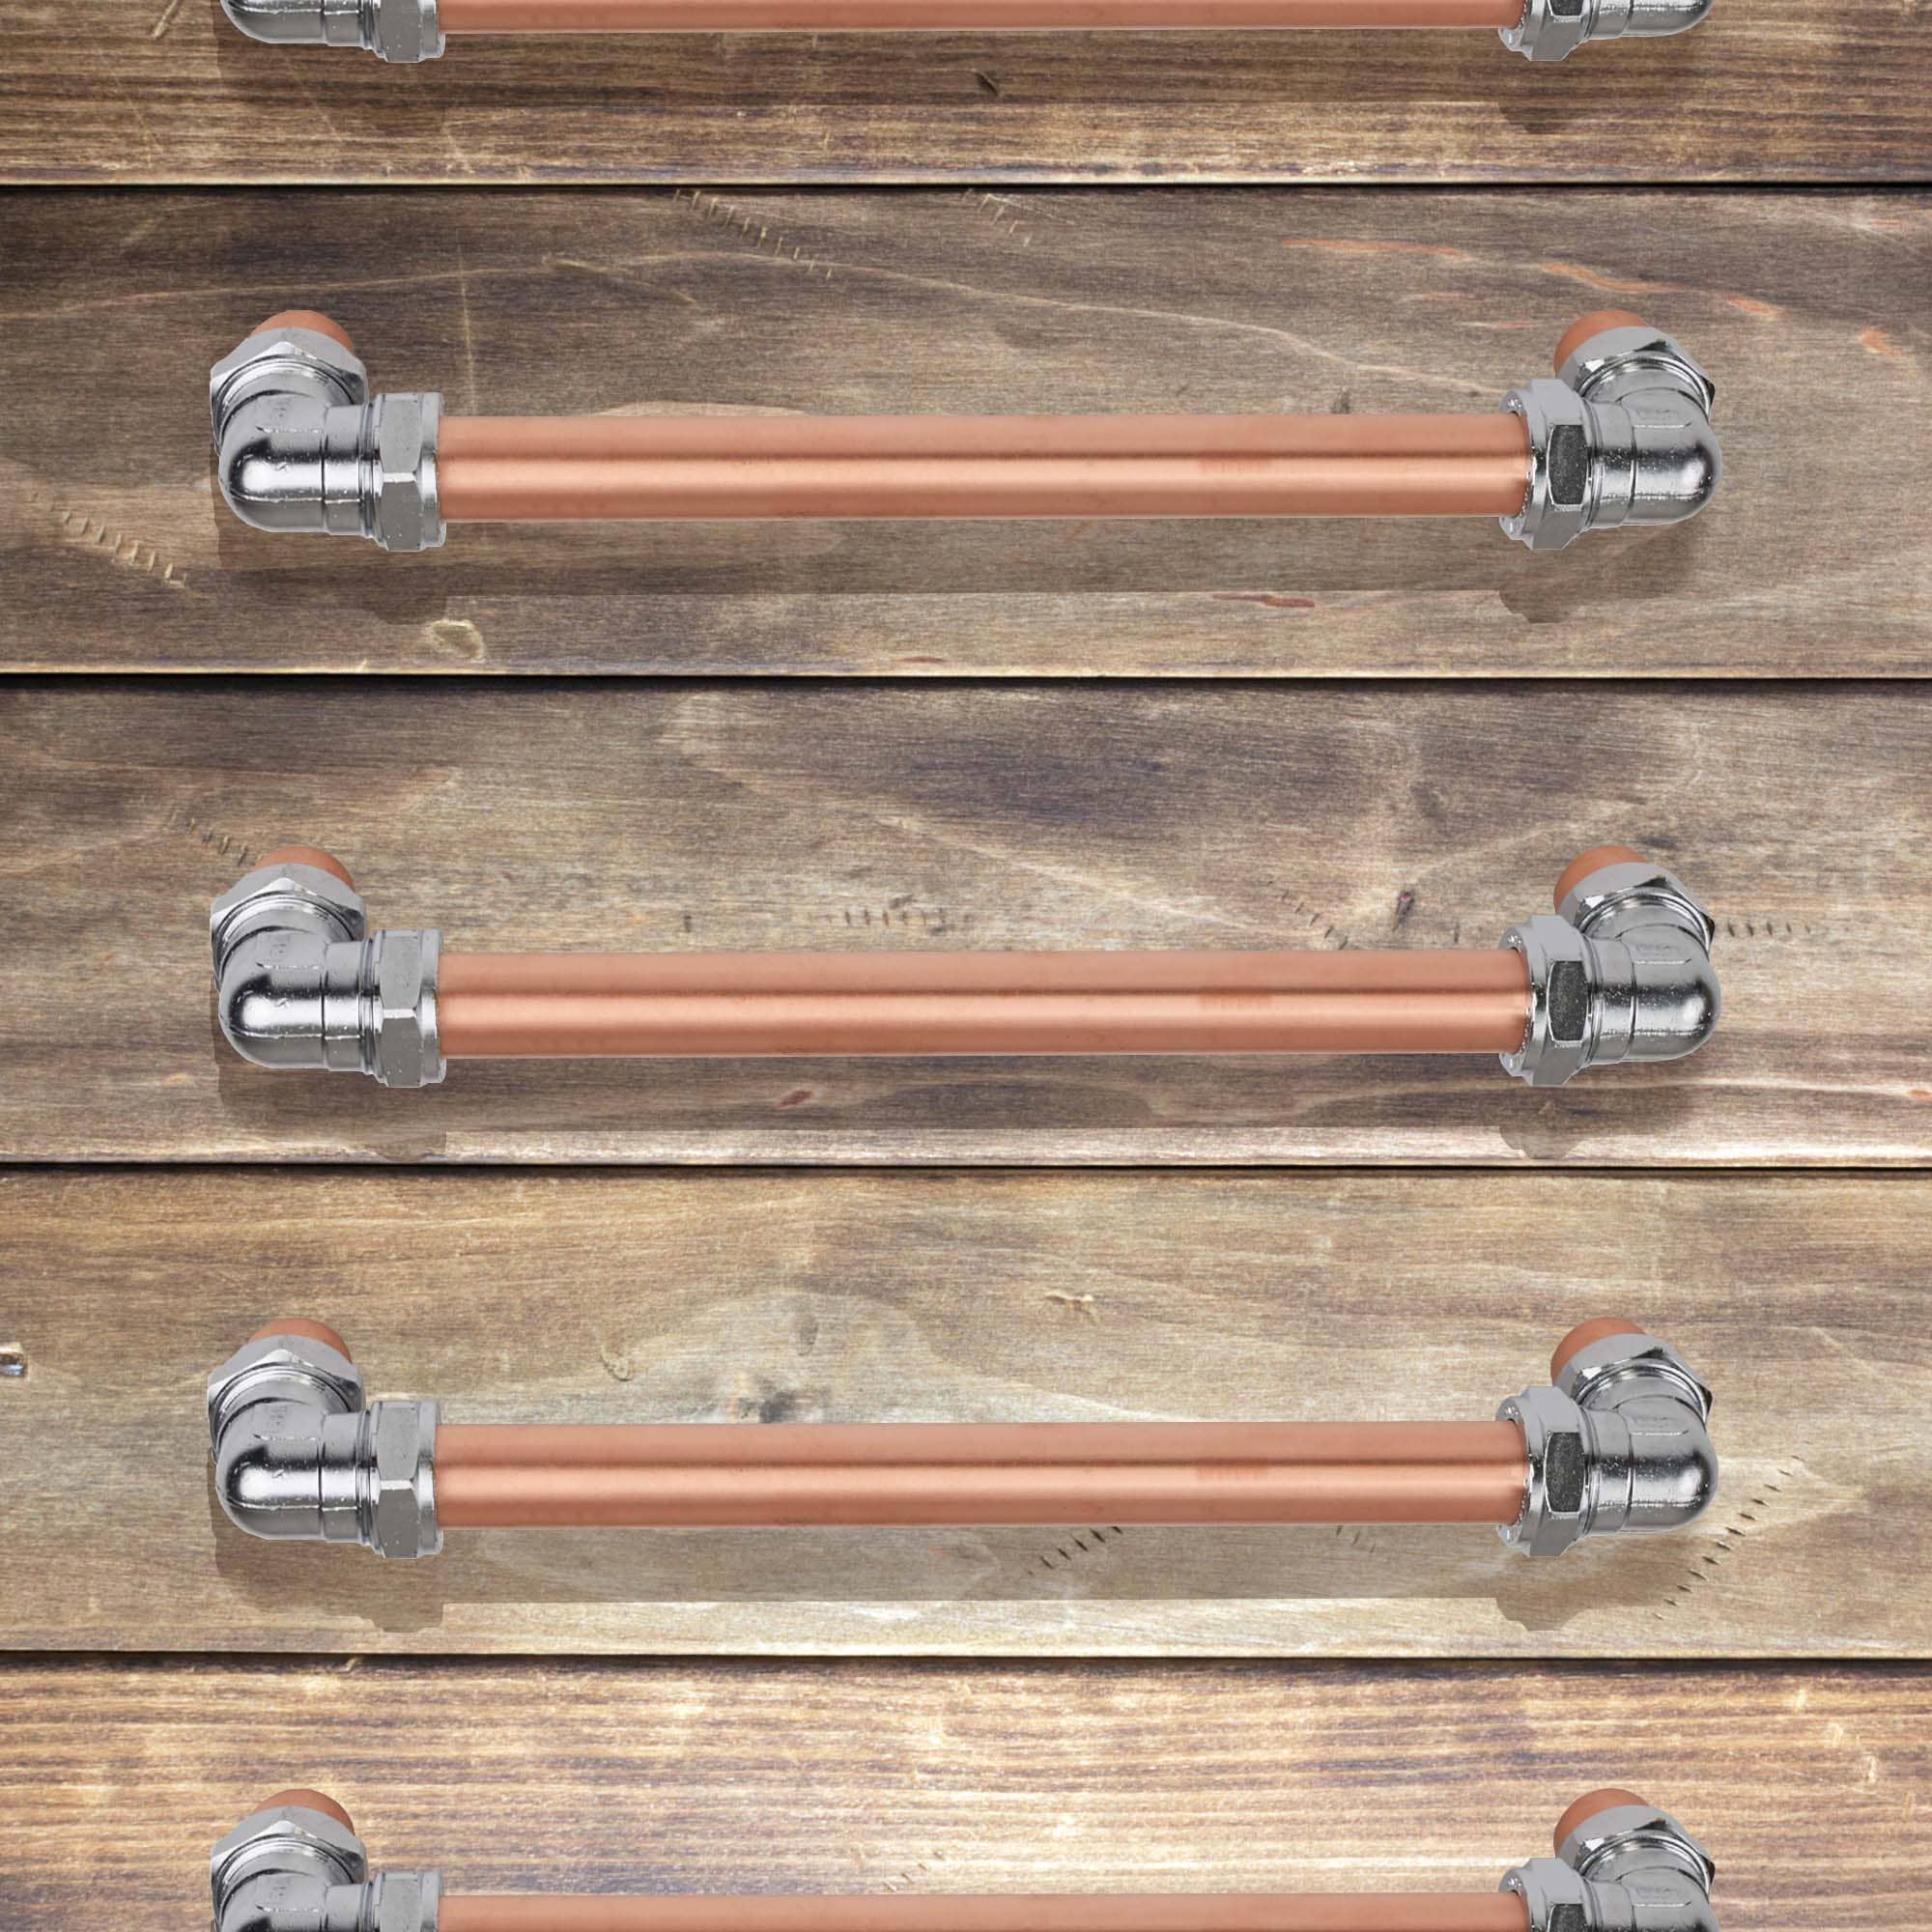 Chrome and copper barn door handle on wooden drawers